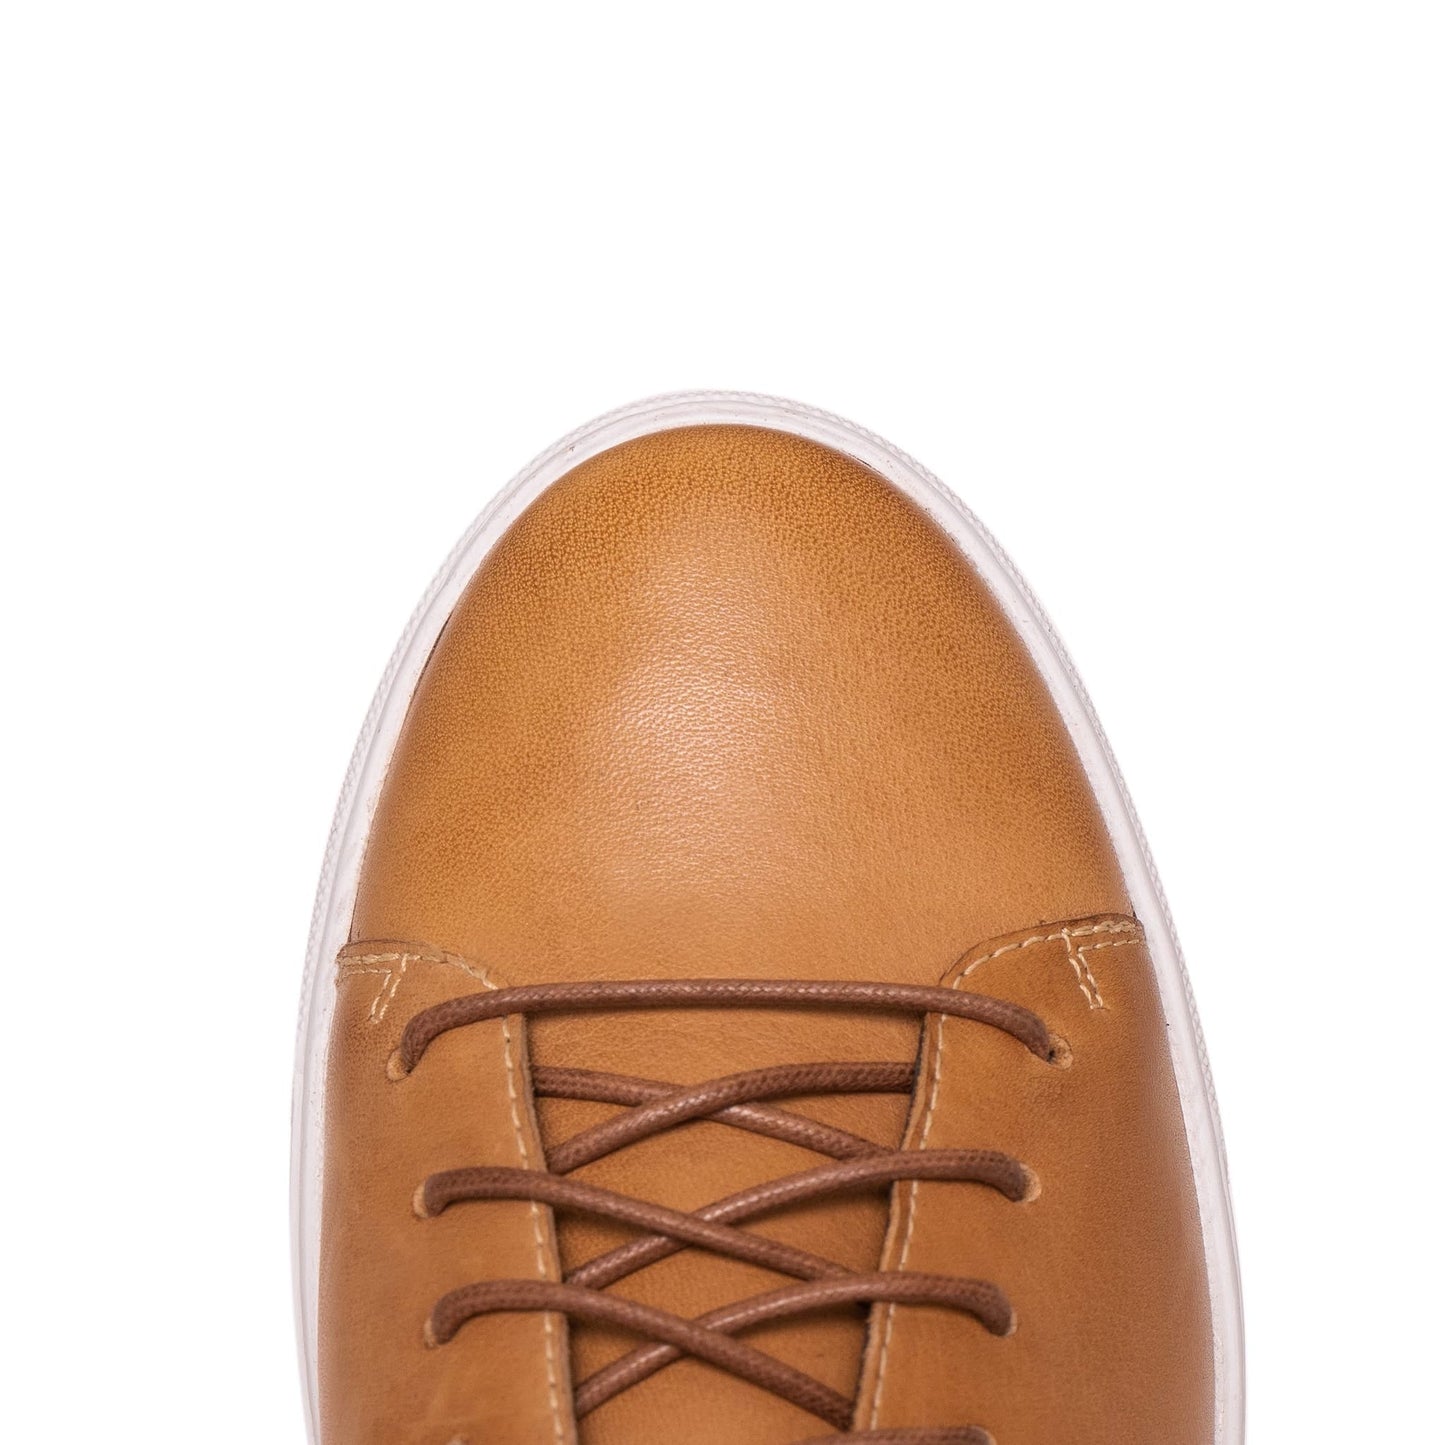 HELM Sneakers The Xander Wheat